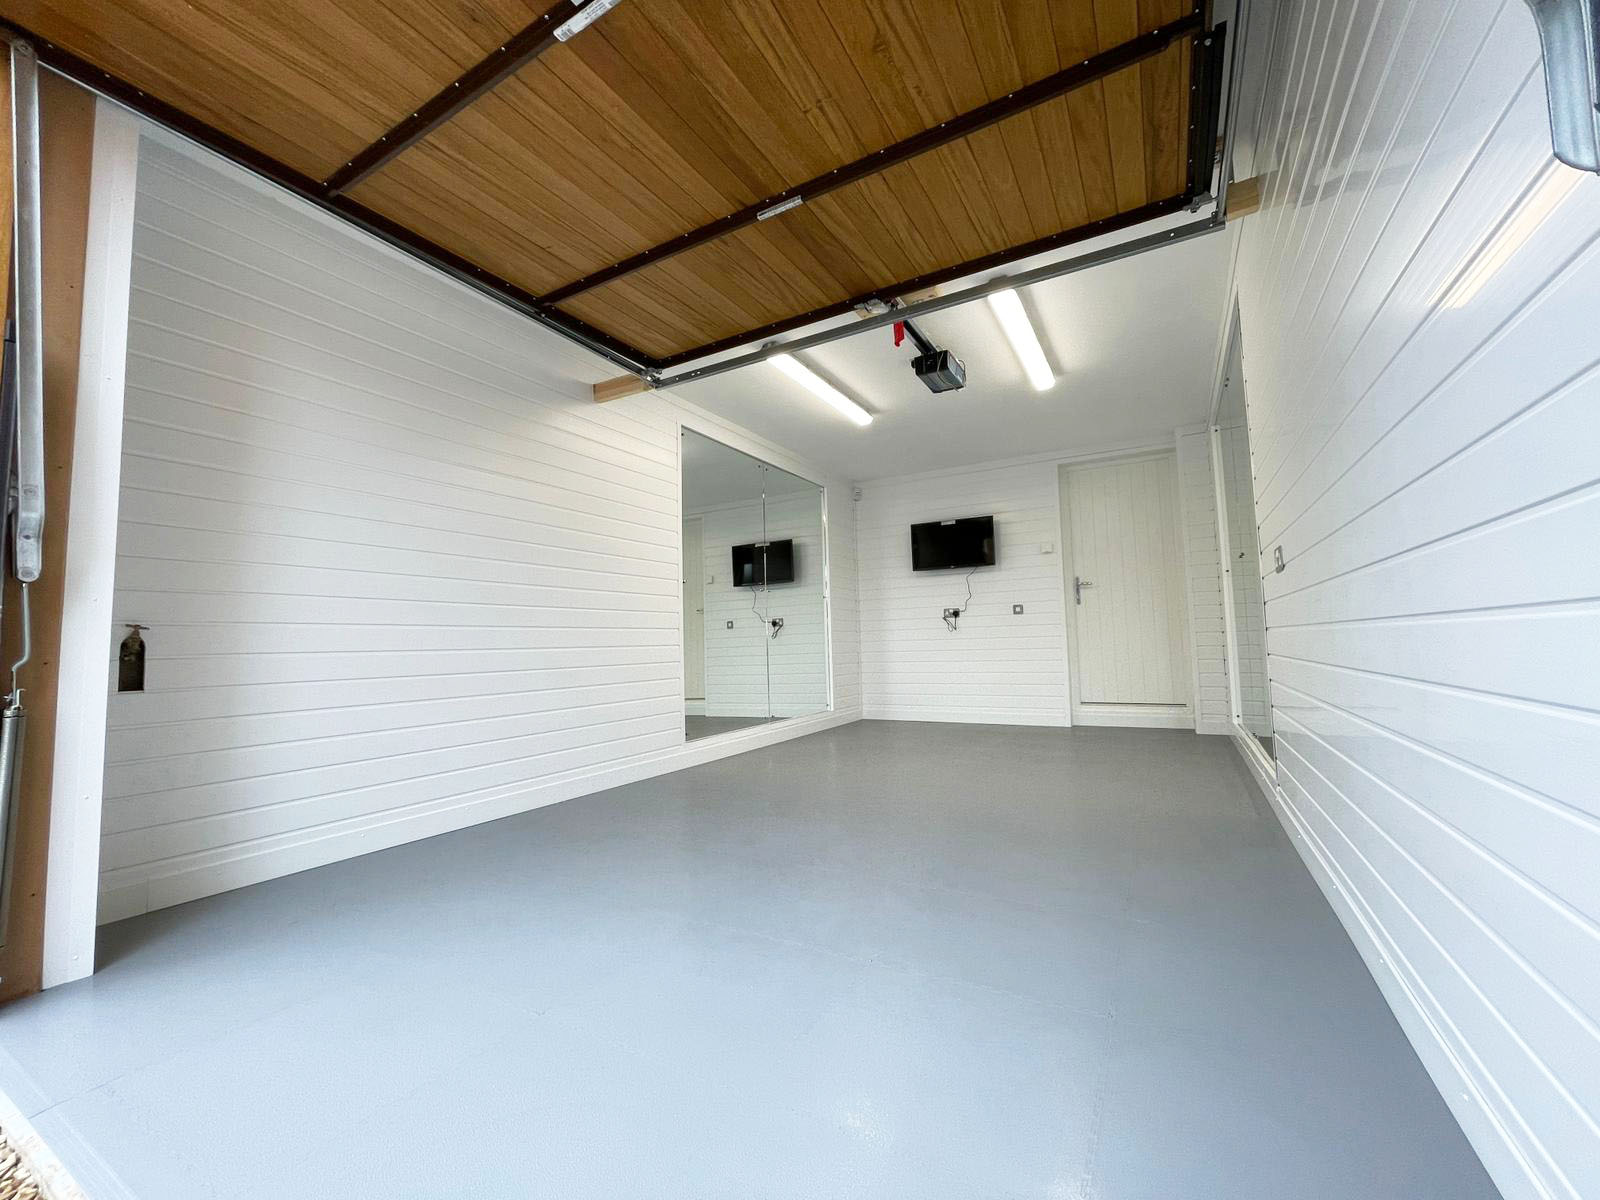 A garage studio conversion with white walls, gym mirrors on the back left wall and a tv on the back wall.